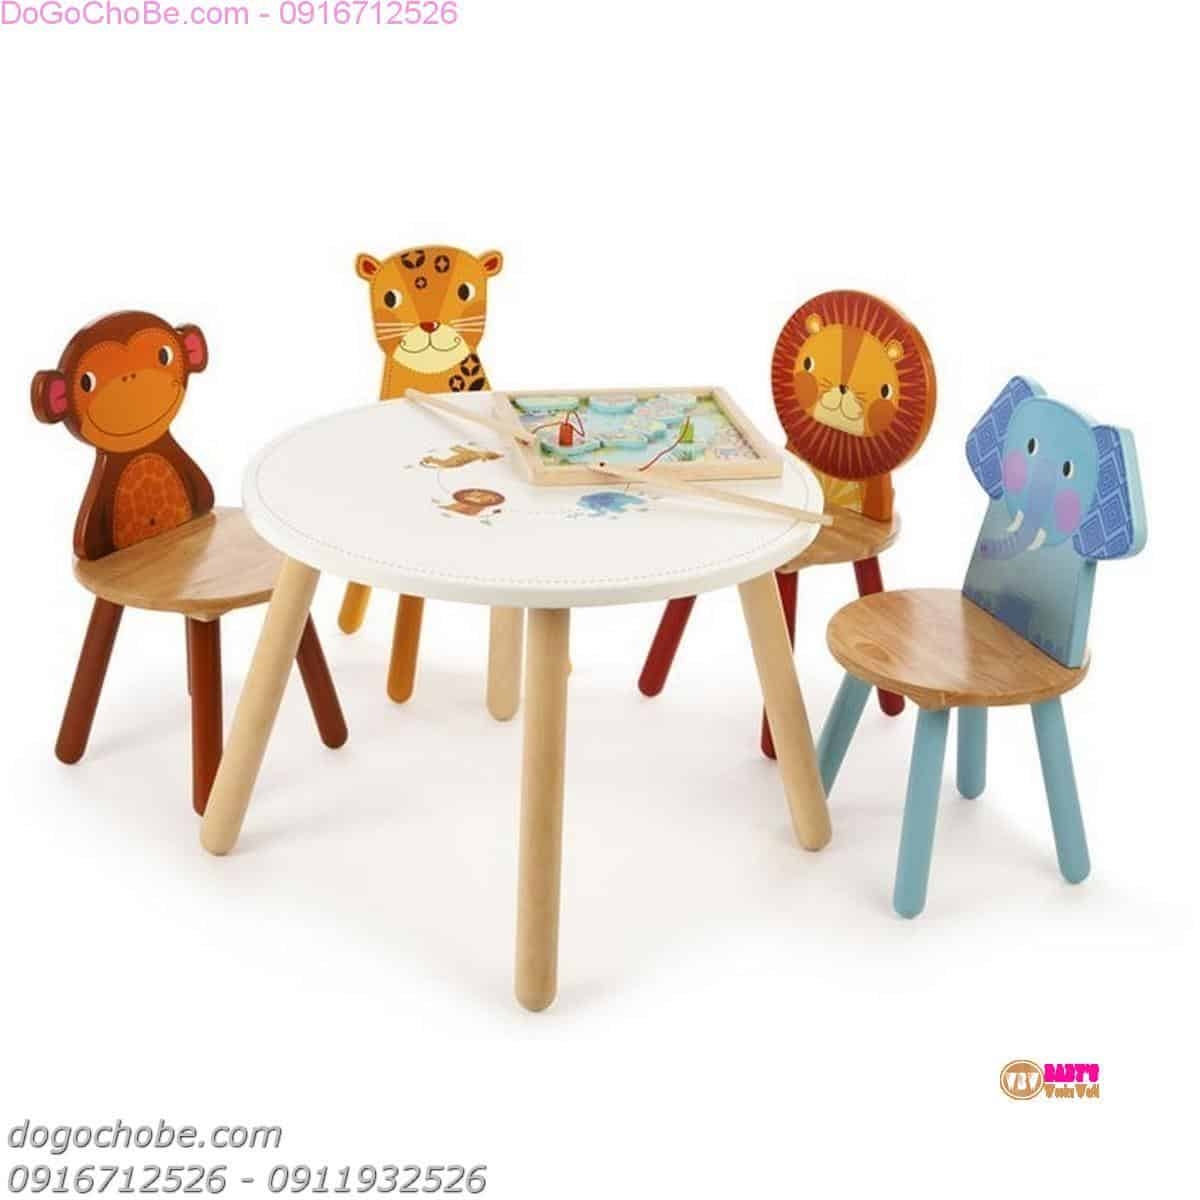 baby wooden chair and table